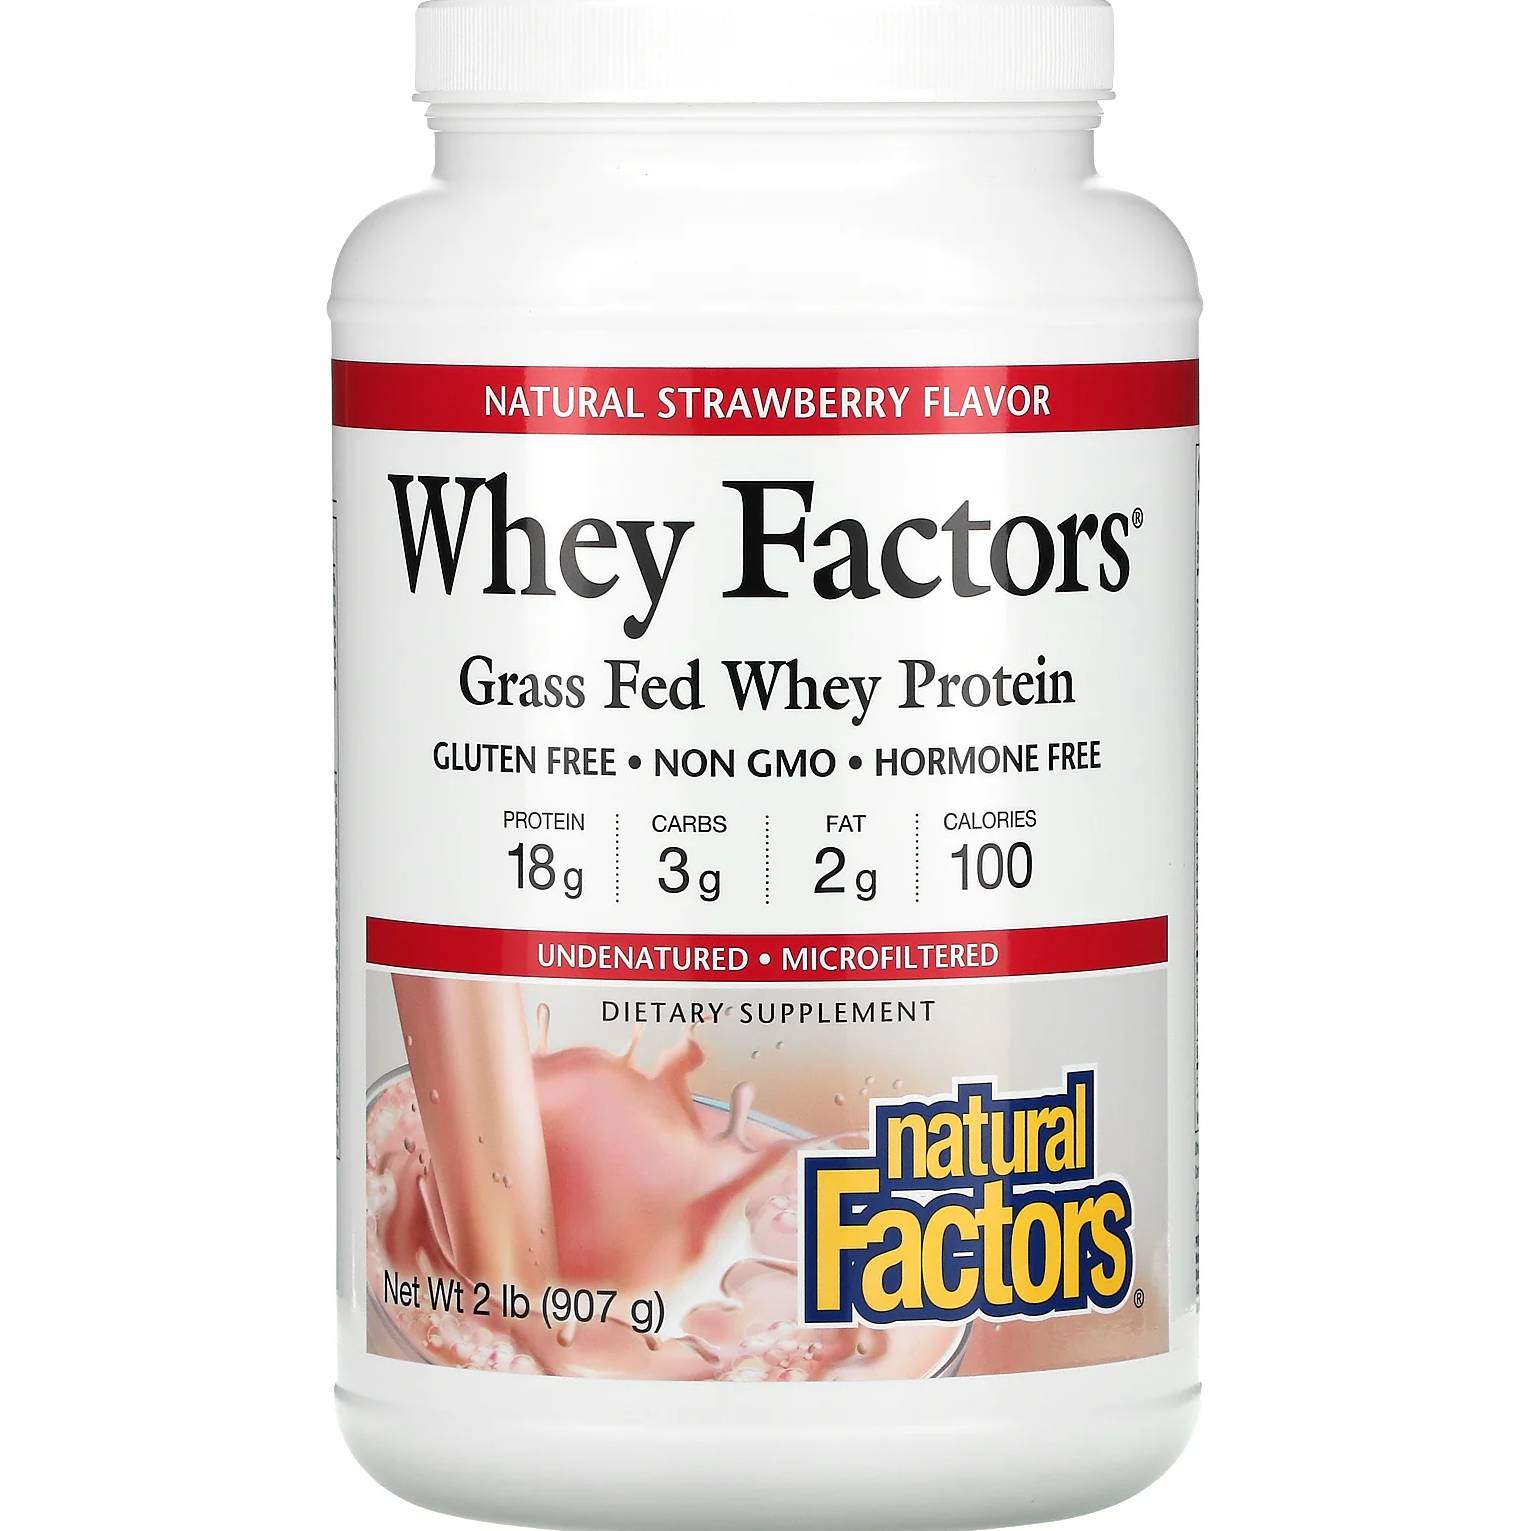 Natural Factors Whey Factors Protein 1 kg Delicious Strawberry